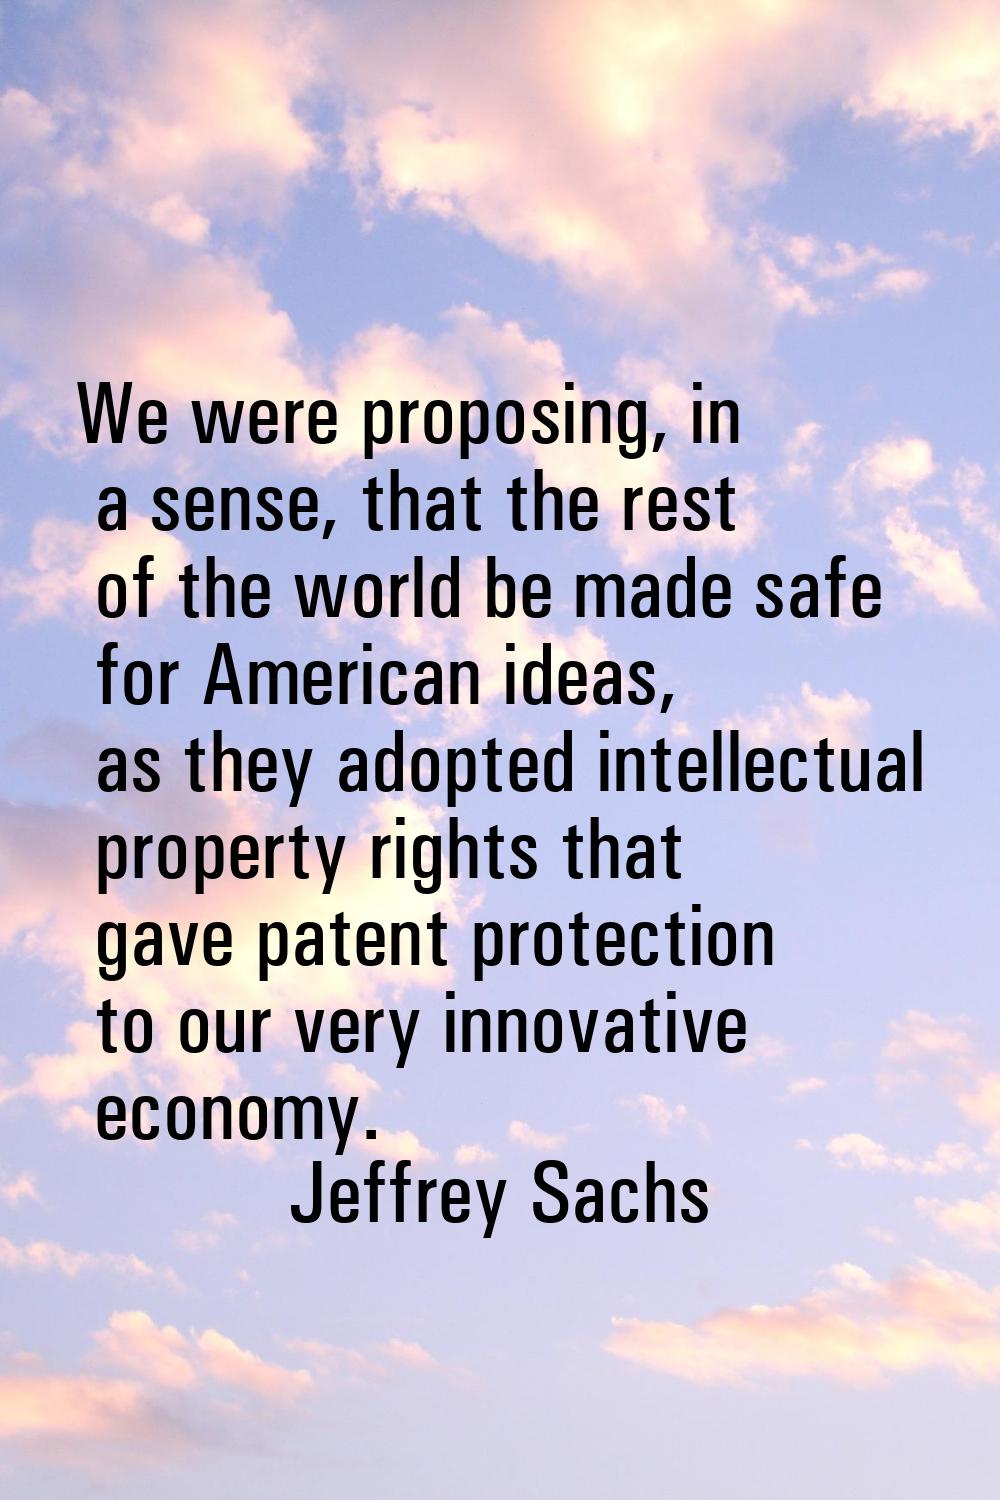 We were proposing, in a sense, that the rest of the world be made safe for American ideas, as they 